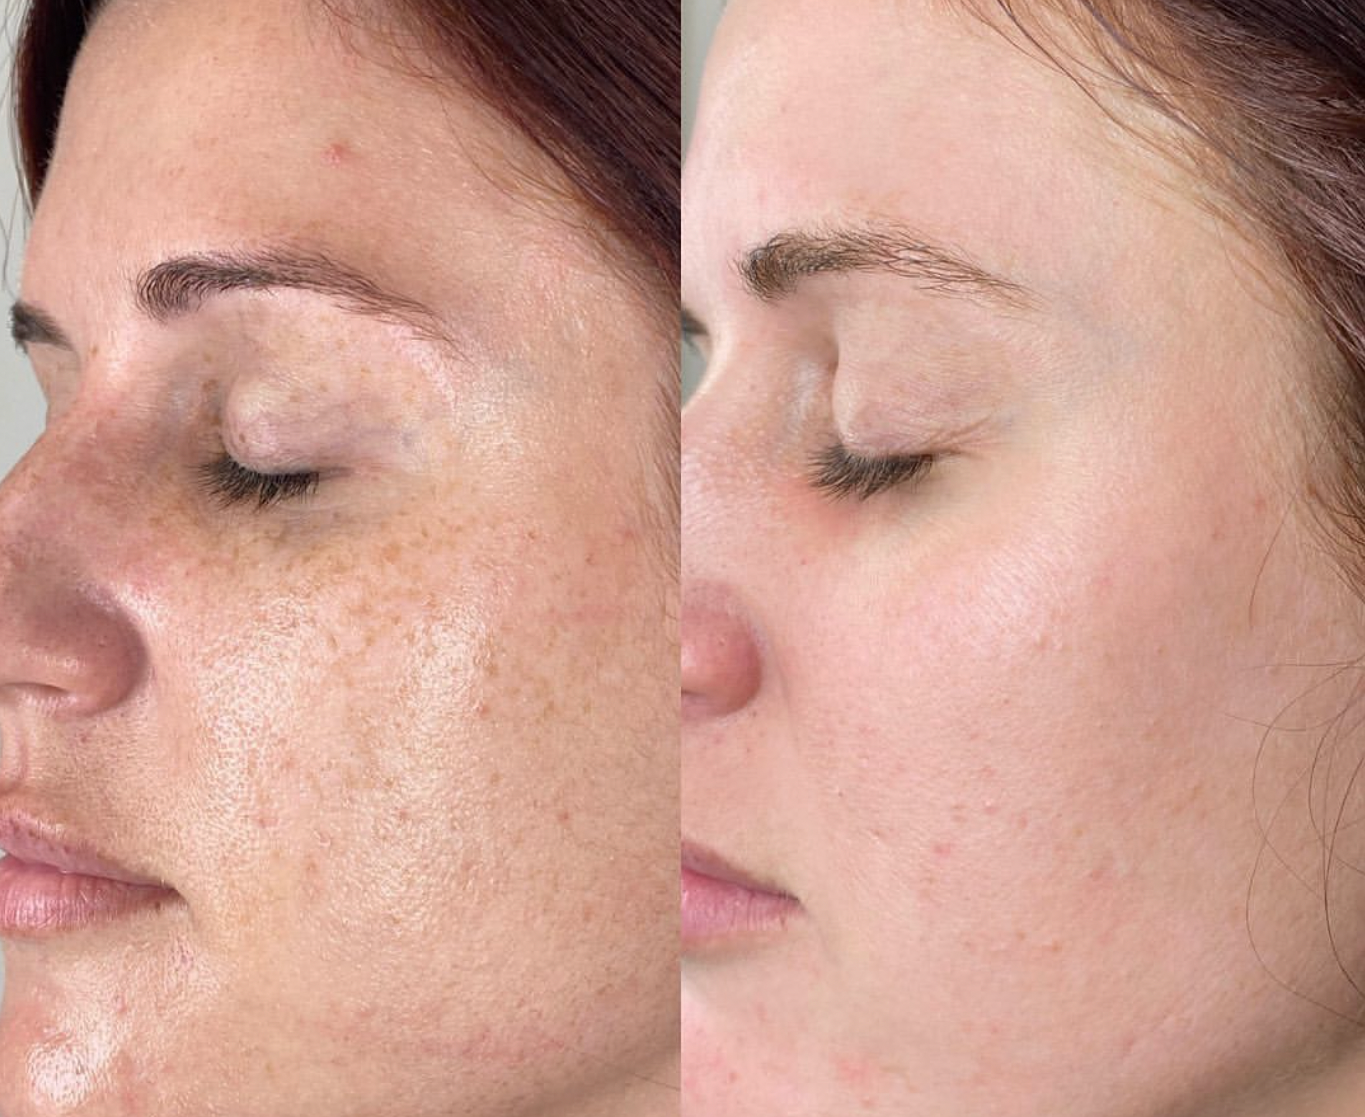 Reveskin Revepeel even skin tone reduce melasma, age spots and sun damage before and after